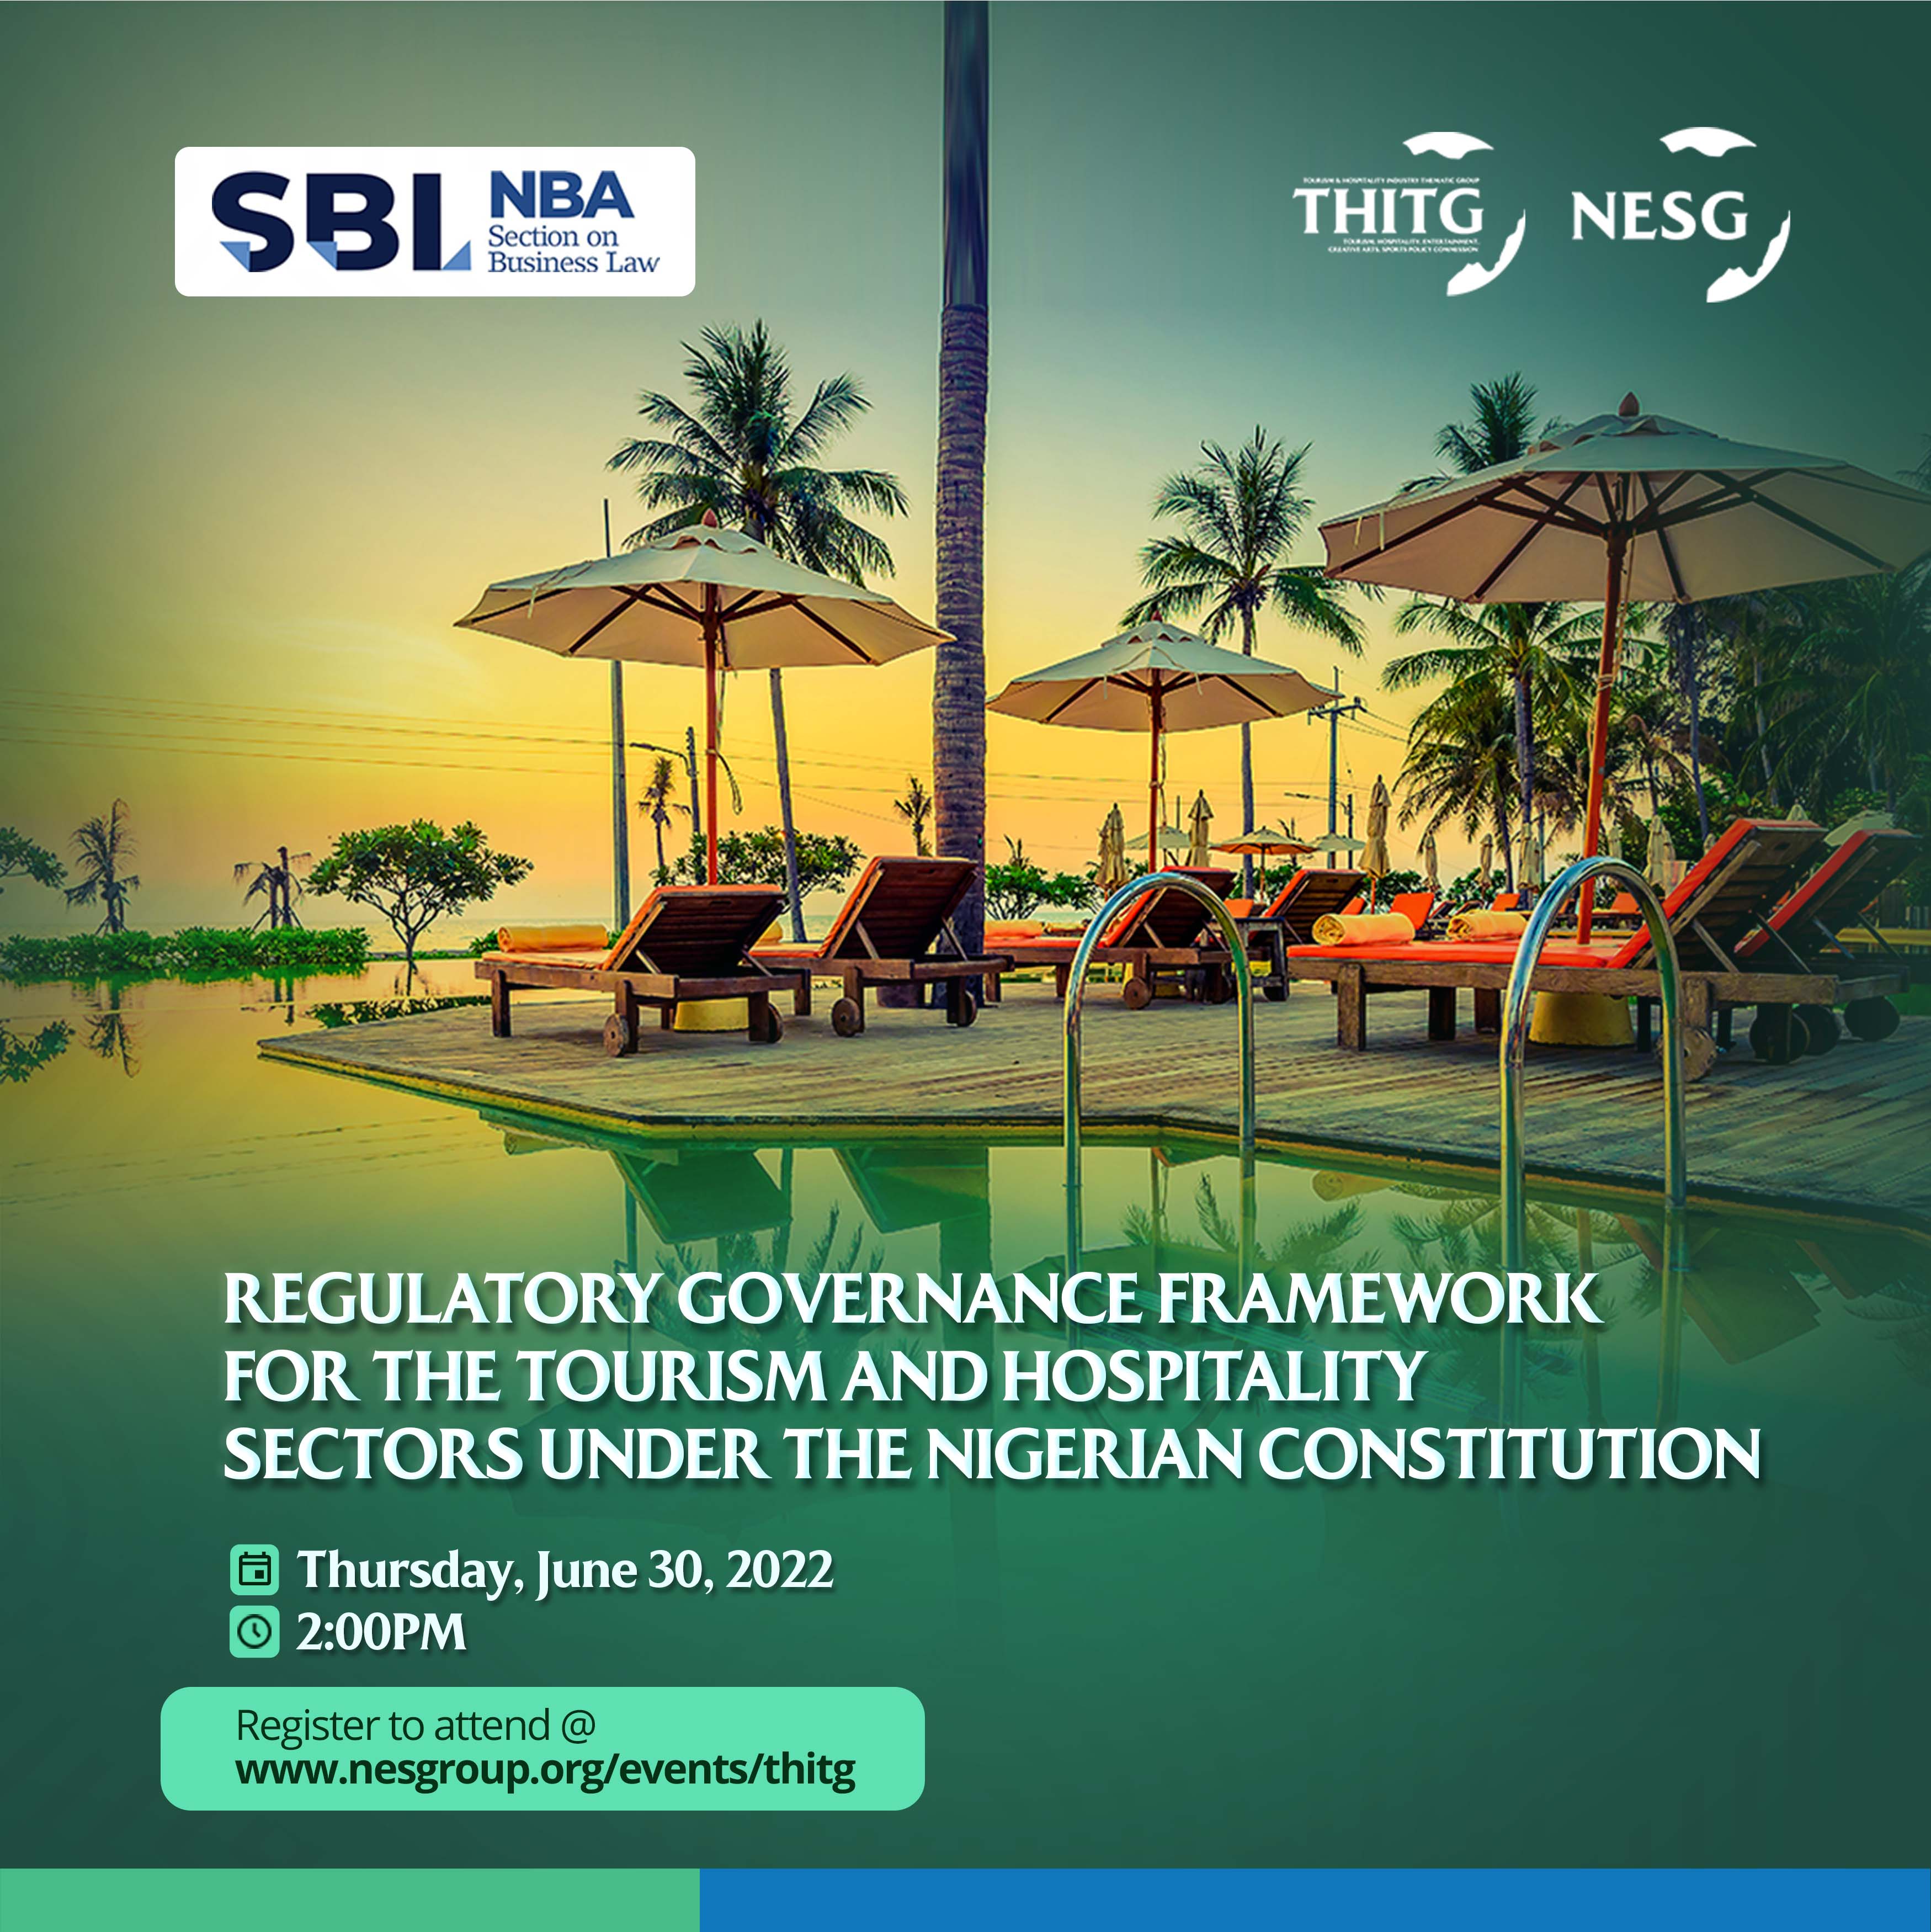 Tourism, Hospitality, Entertainment, Creatives & Sports Industries, The Nigerian Economic Summit Group, The NESG, think-tank, think, tank, nigeria, policy, nesg, africa, number one think in africa, best think in nigeria, the best think tank in africa, top 10 think tanks in nigeria, think tank nigeria, economy, business, PPD, public, private, dialogue, Nigeria, Nigeria PPD, NIGERIA, PPD